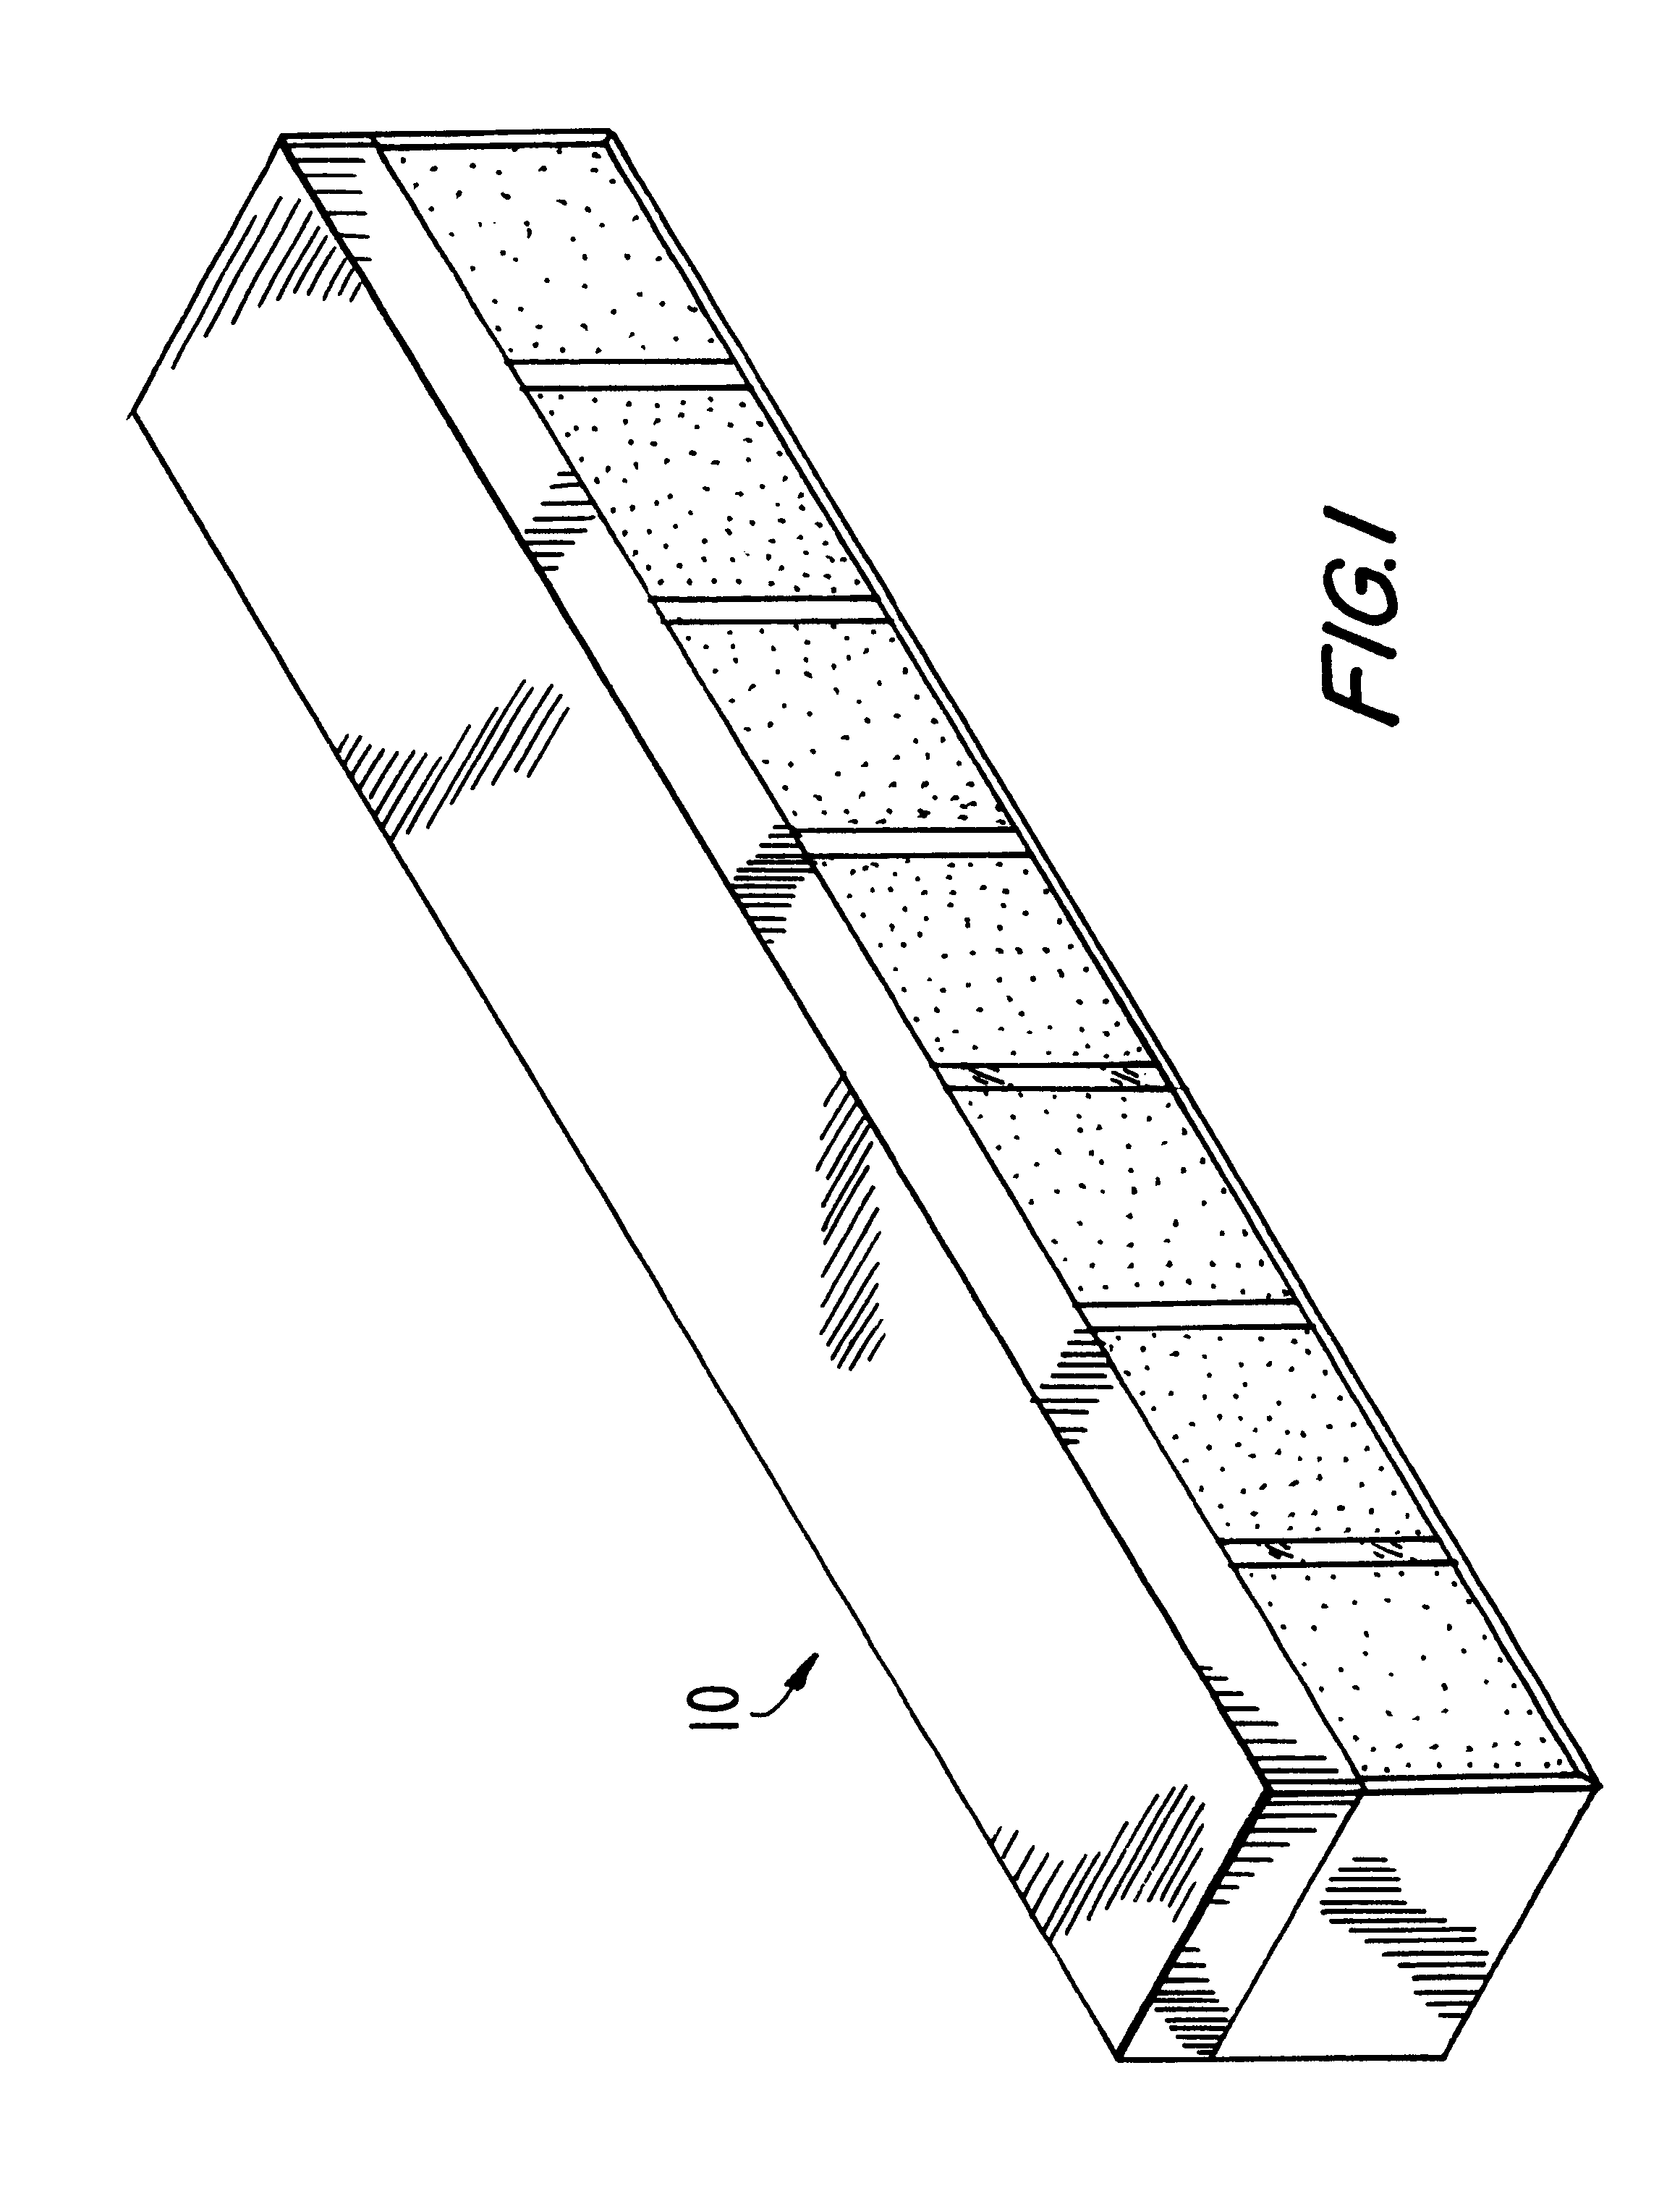 Apparatus for displaying images to viewers in motion